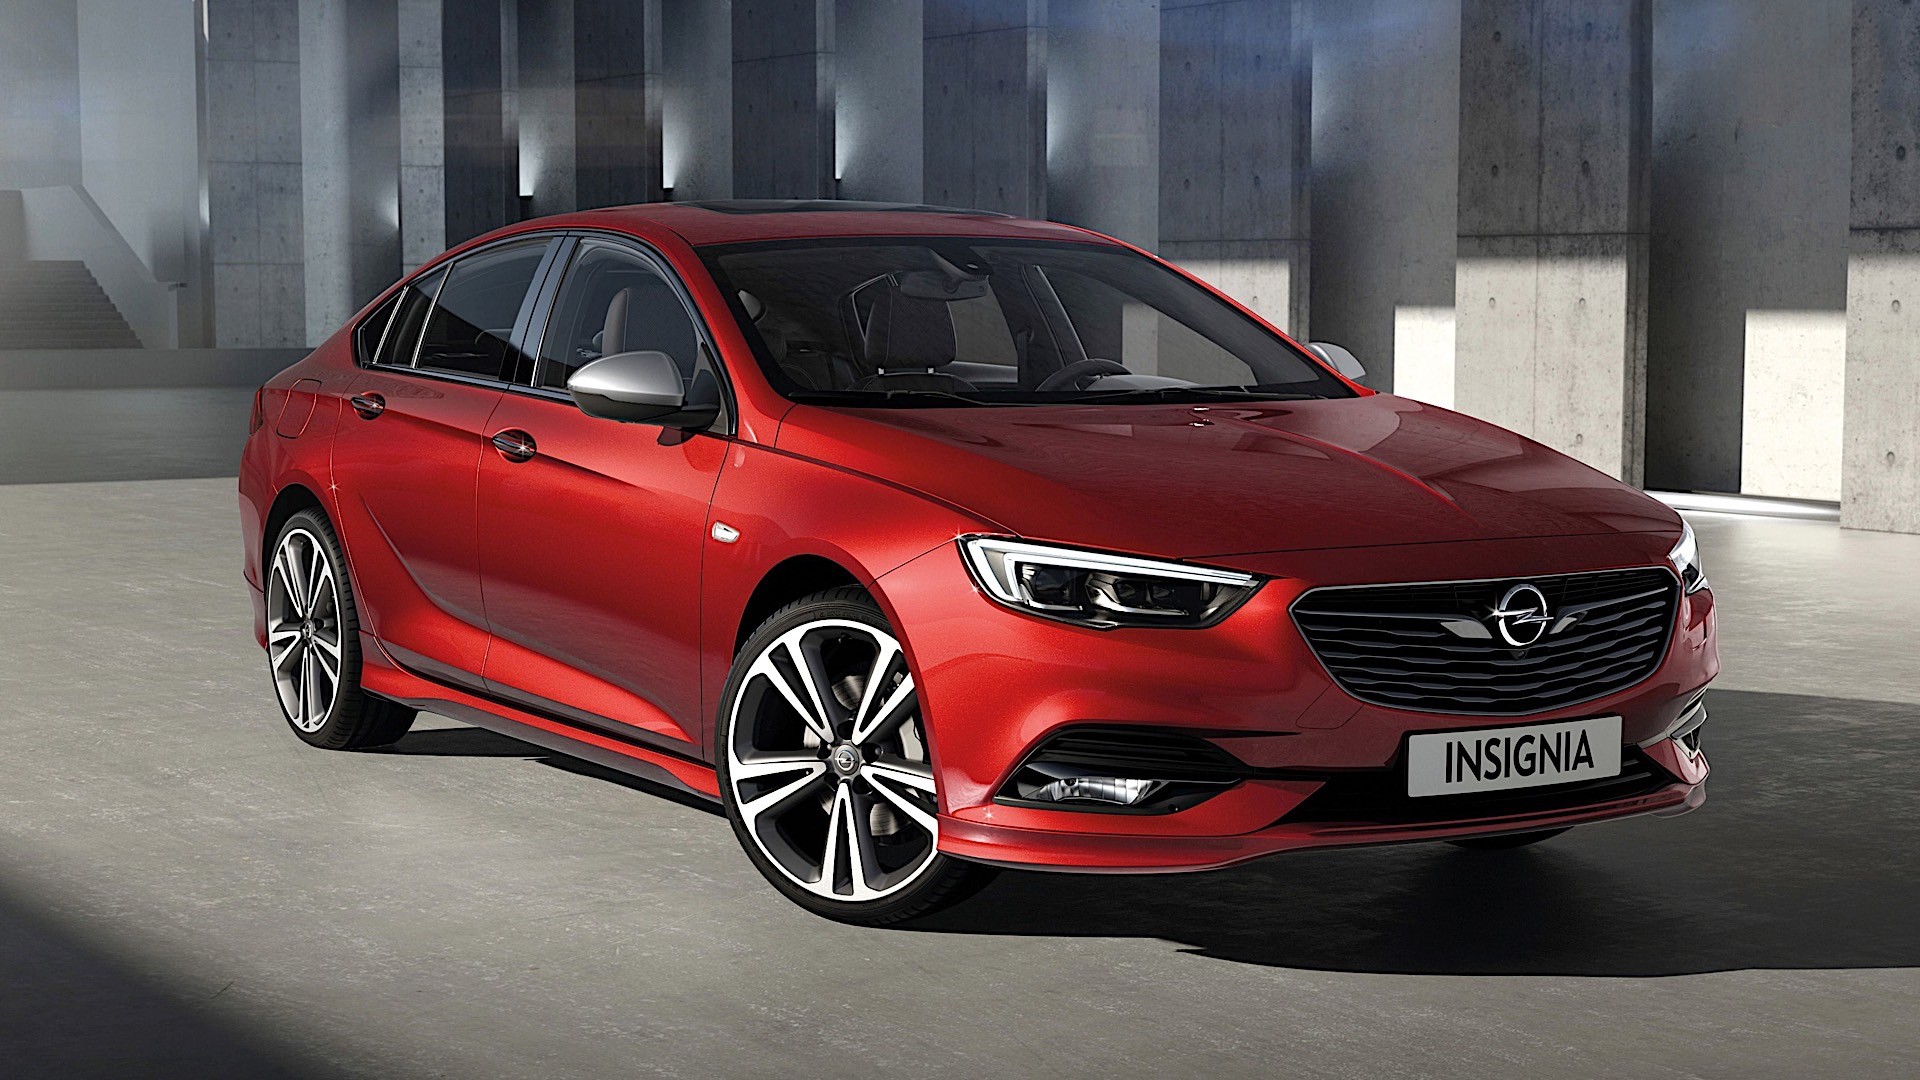 Transient license dance OPEL Insignia Grand Sport (2017, 2018, 2019) - photos, specs reference &  model history